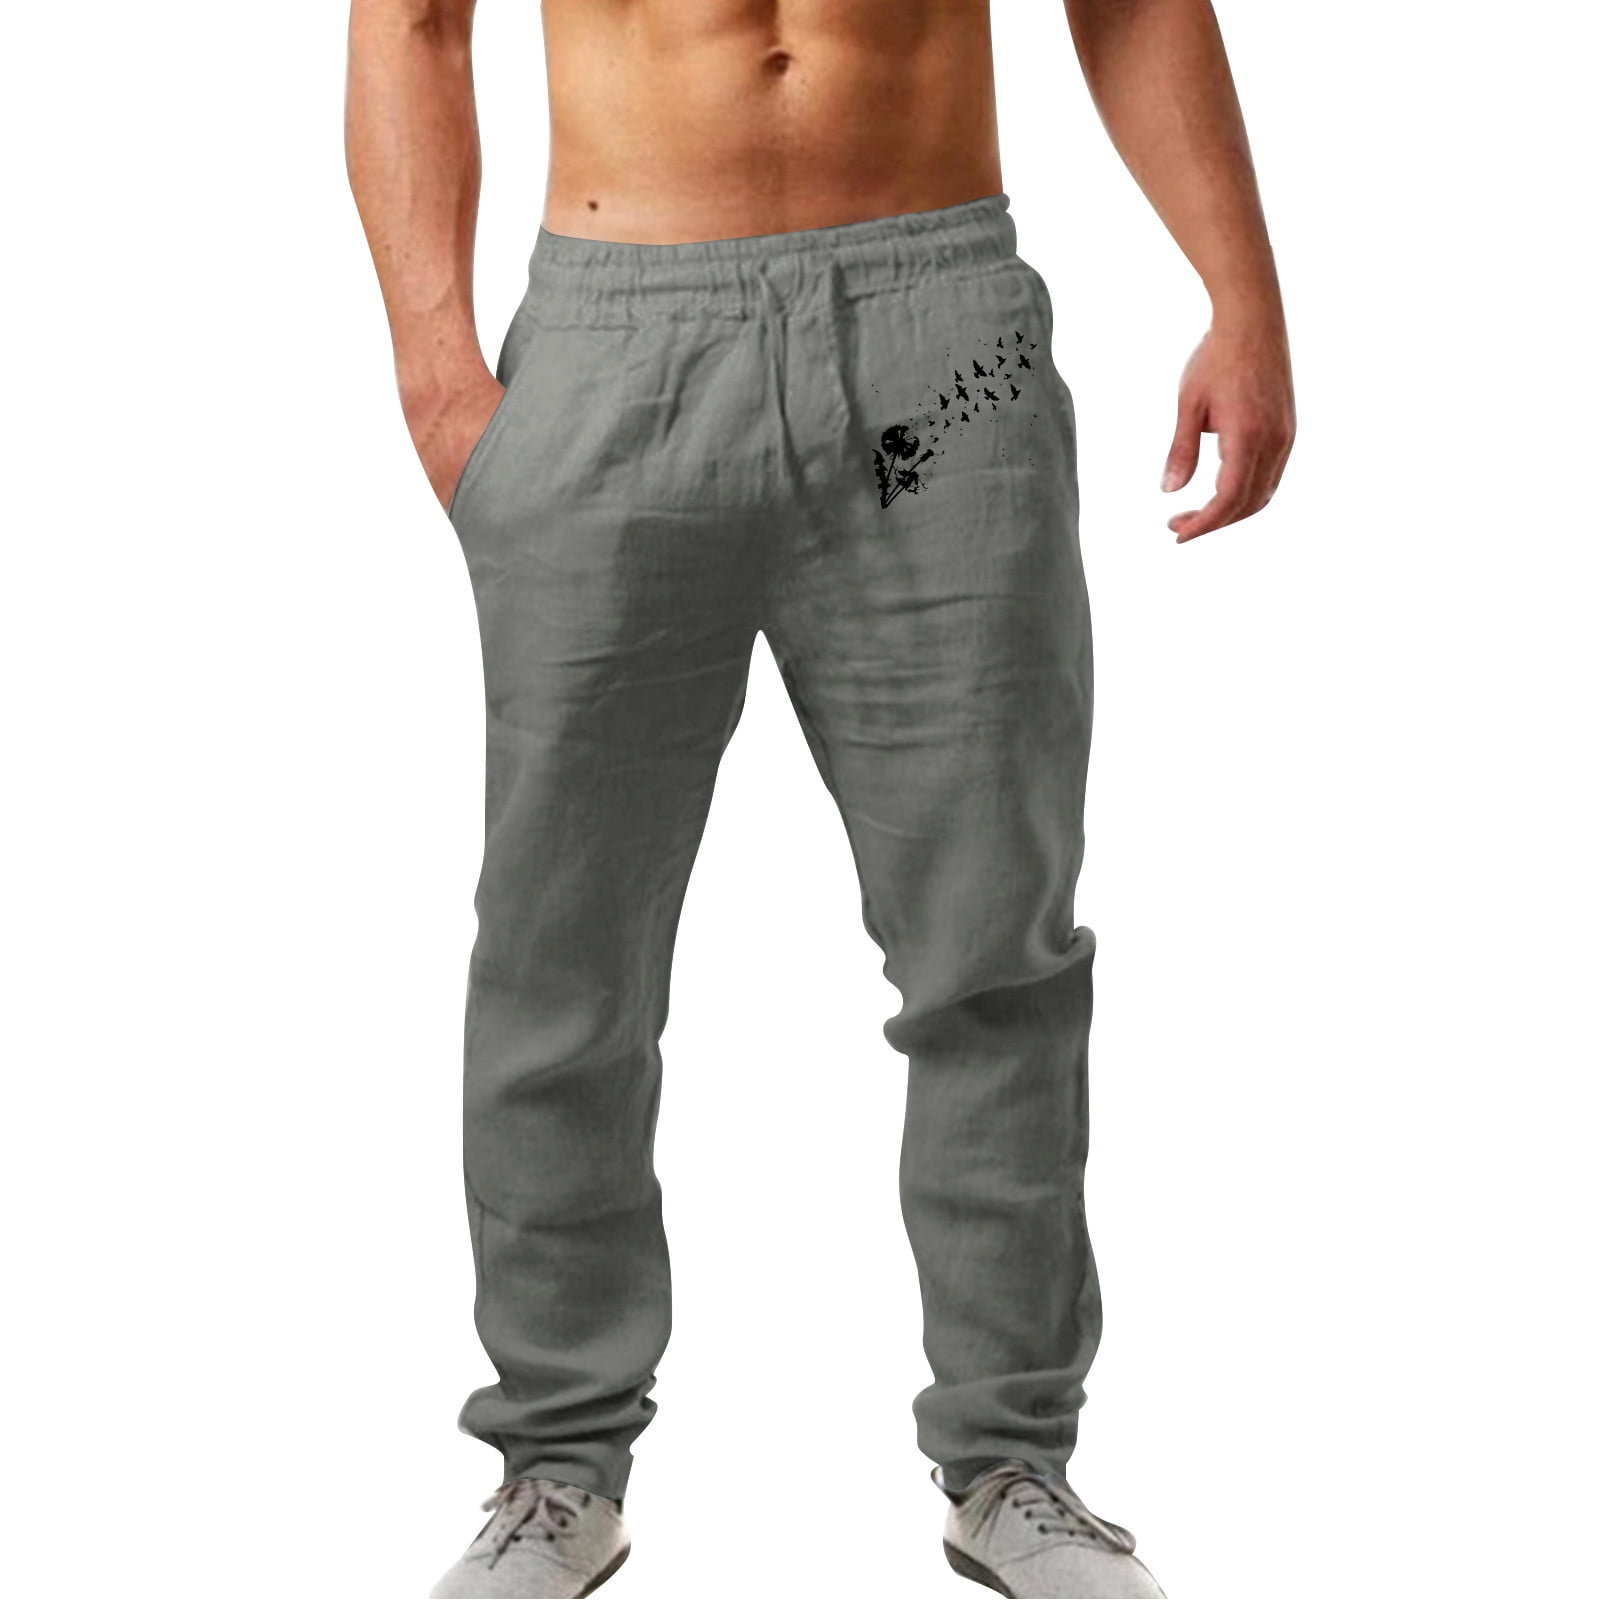 Stylish and Functional Gym Joggers for Men